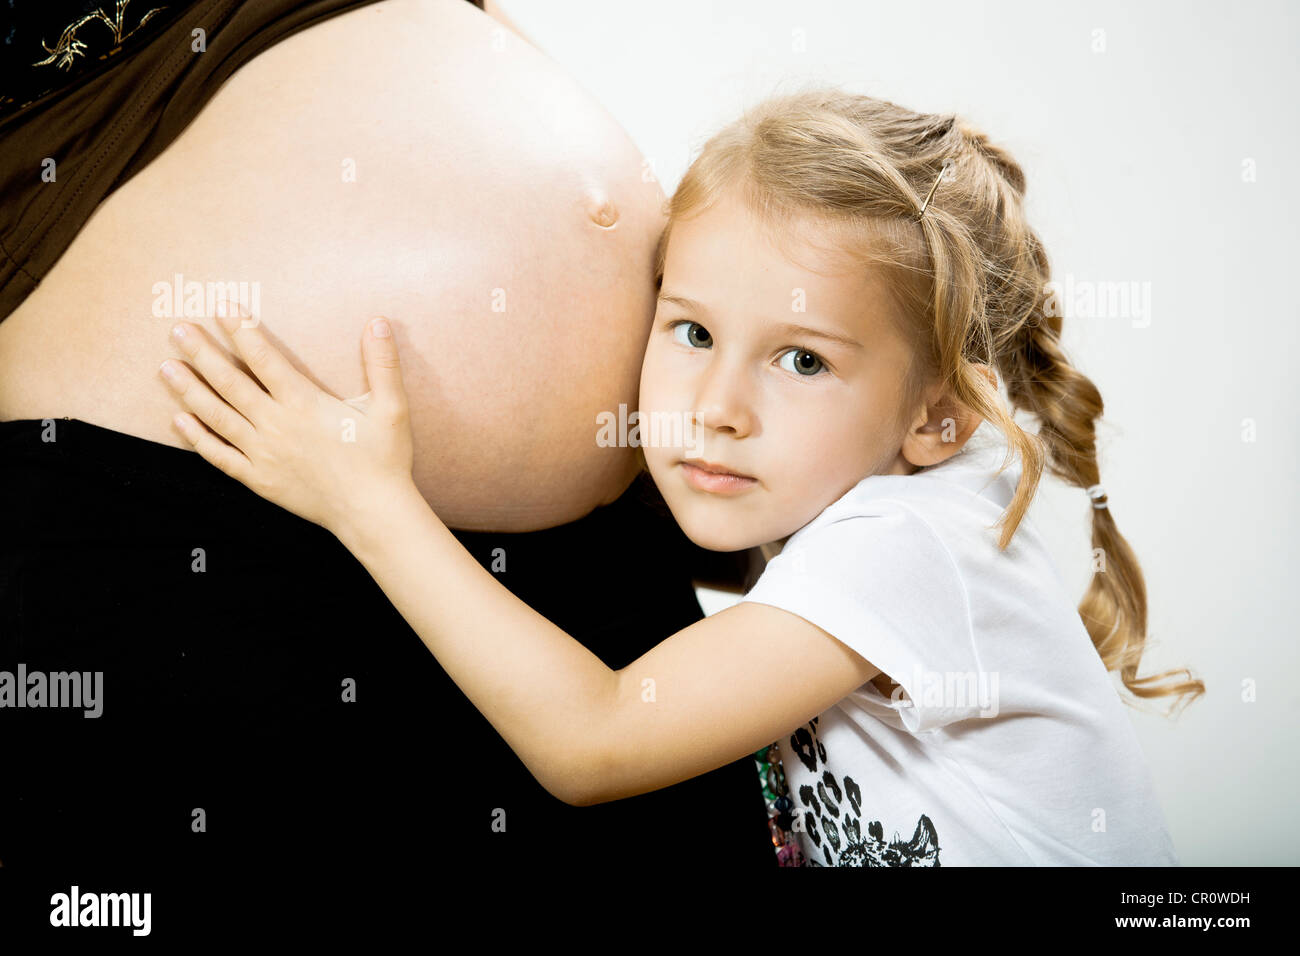 Girl and belly of pregnant mother Stock Photo